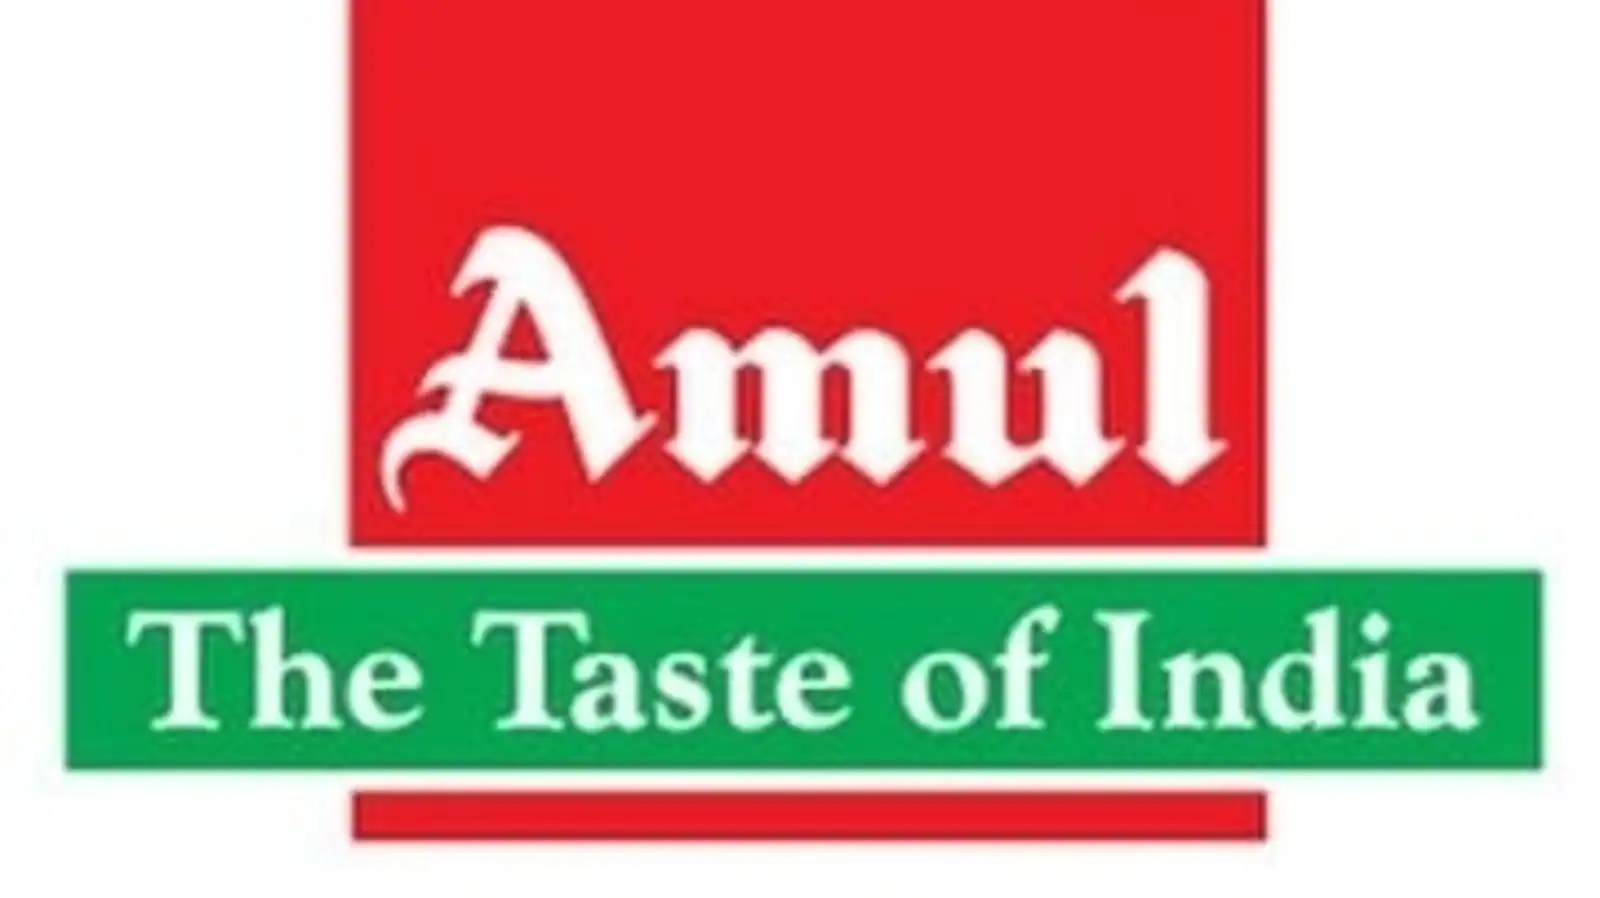 Amul increases milk prices by ₹2 per litre across varieties. Check new rates